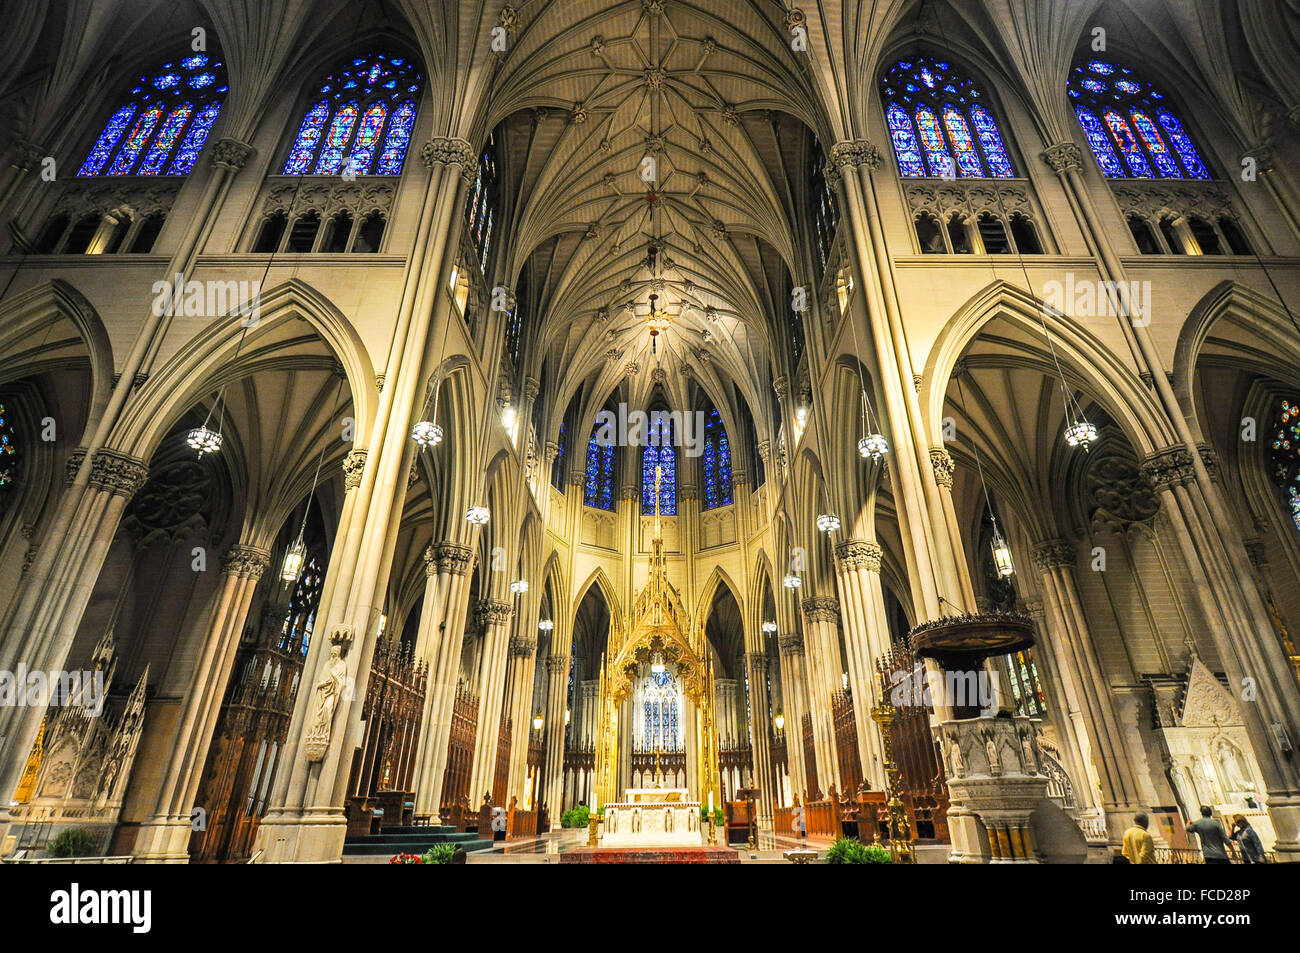 St. Patrick's Cathedral Interior. Stock Photo